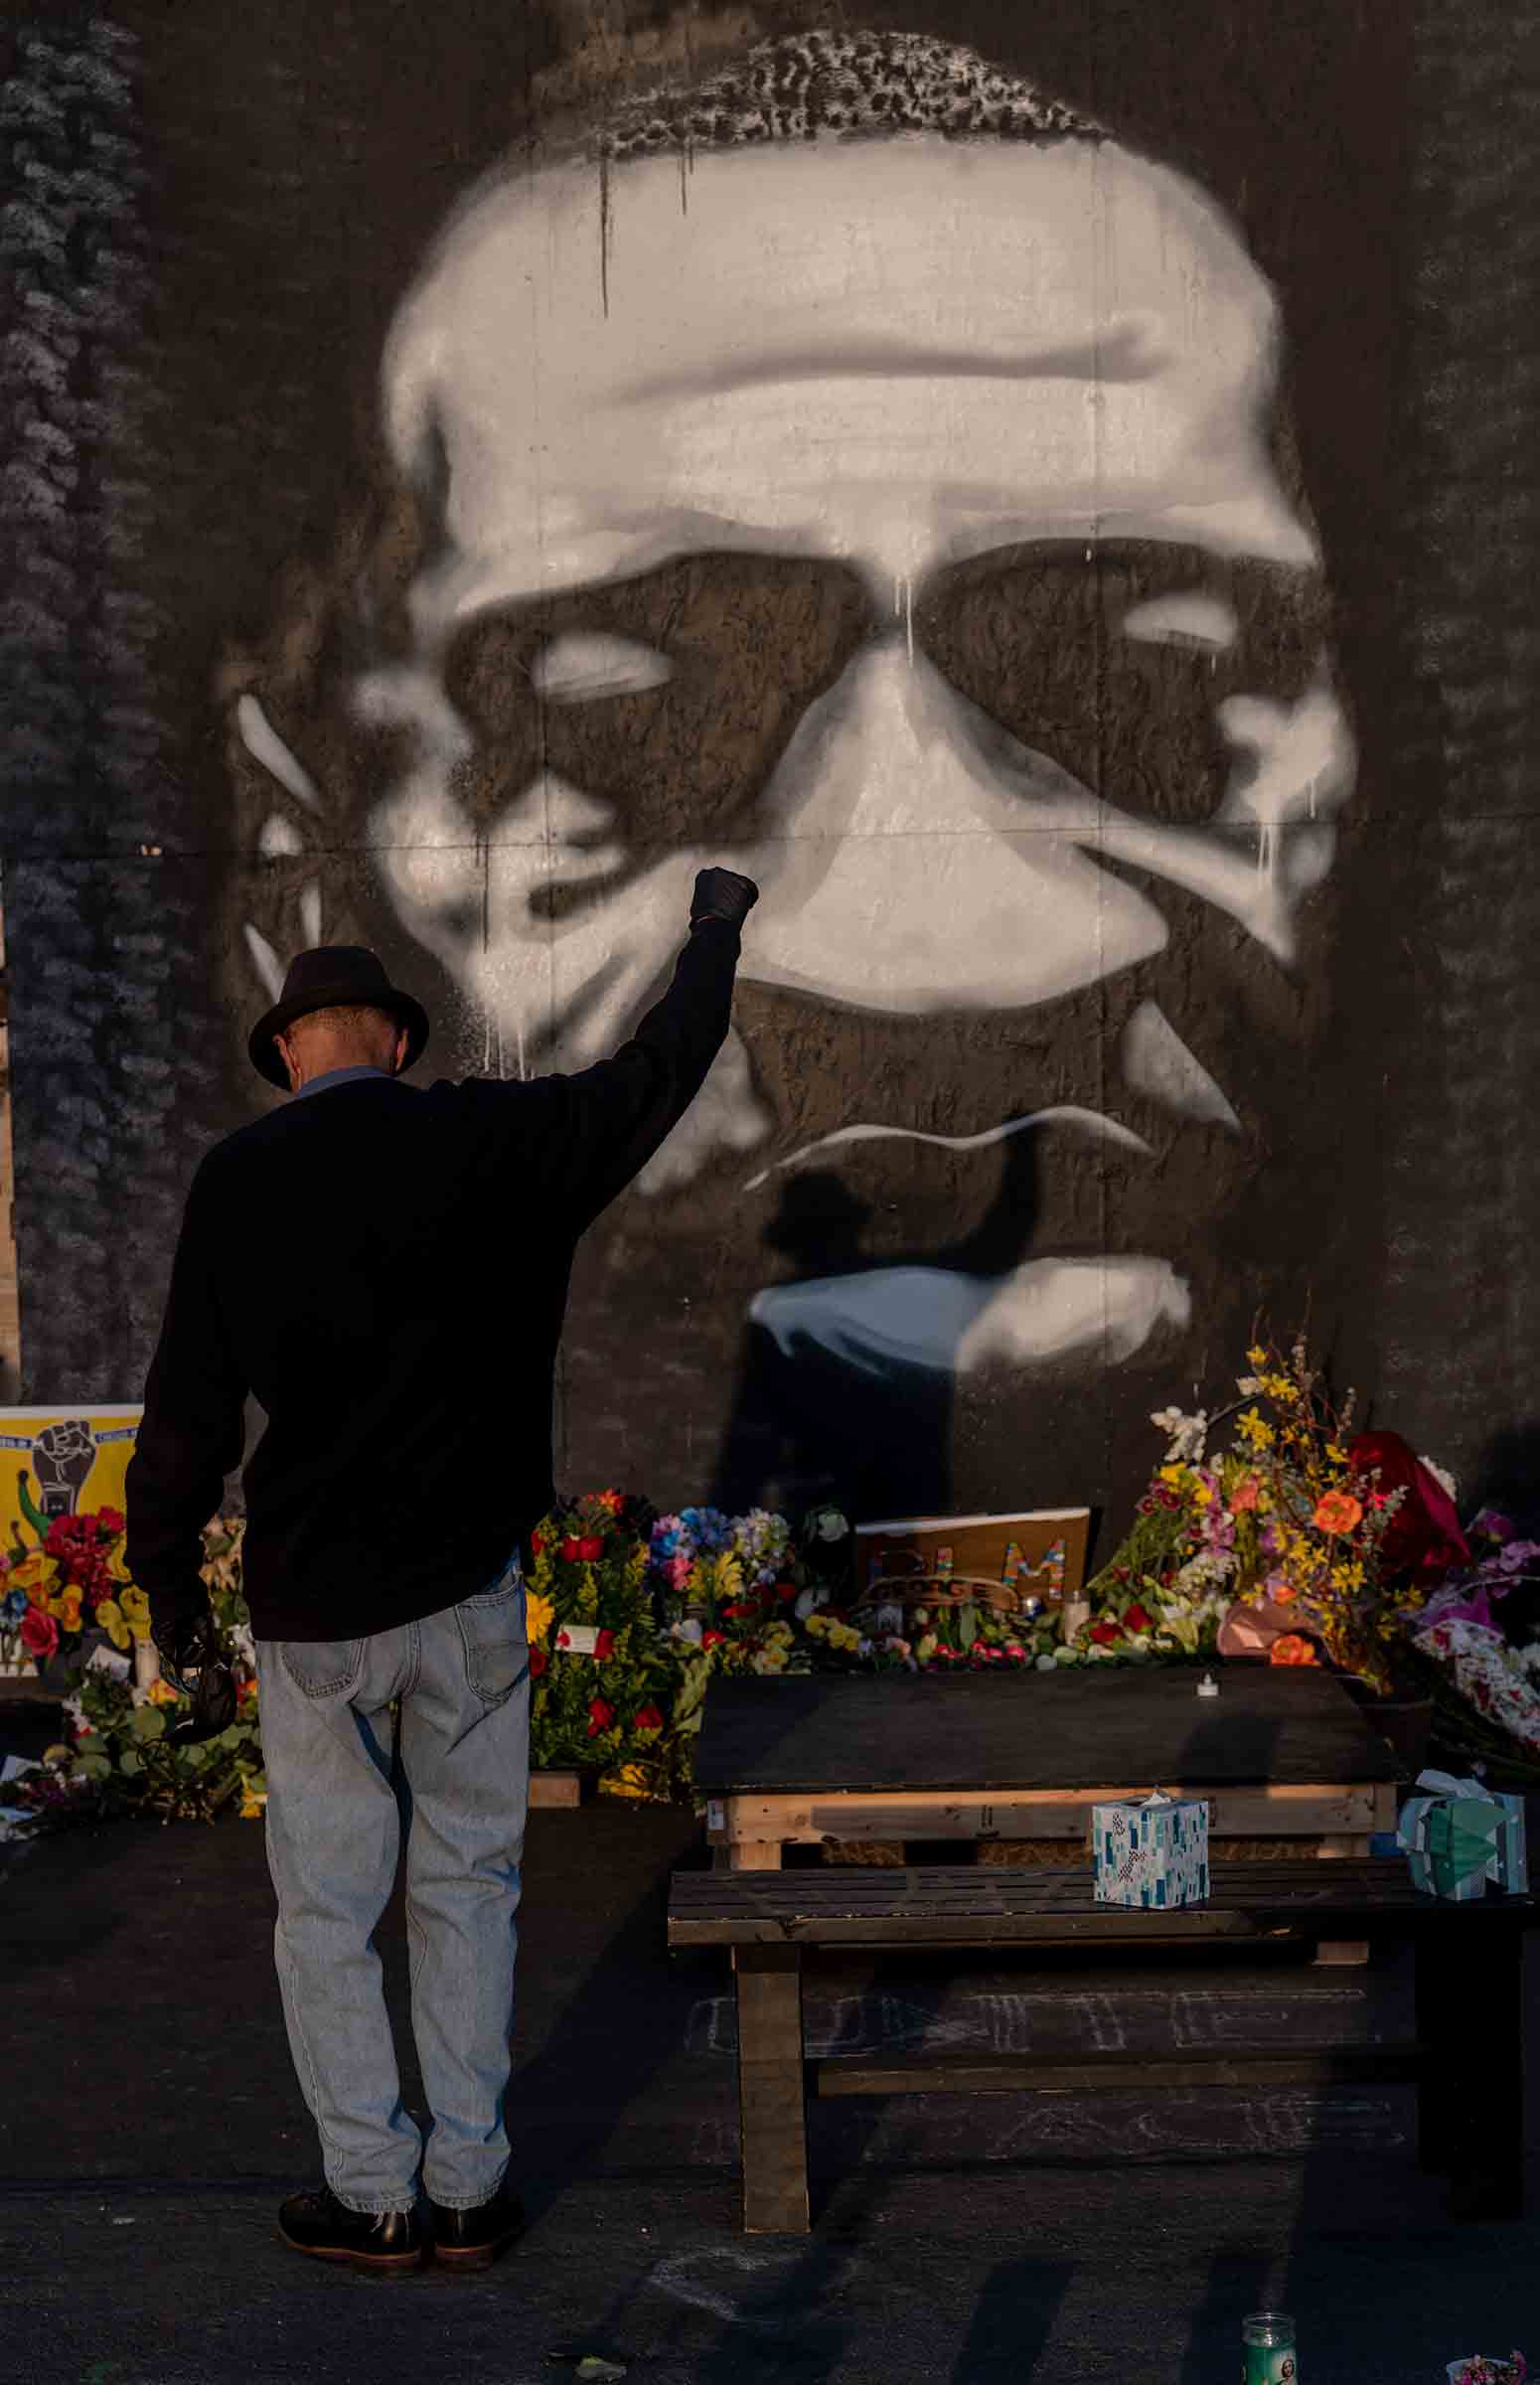 A man pays tribute to George Floyd at the memorial outside Cup Foods in Minneapolis, April 2021. (Ruddy Roye for TIME)